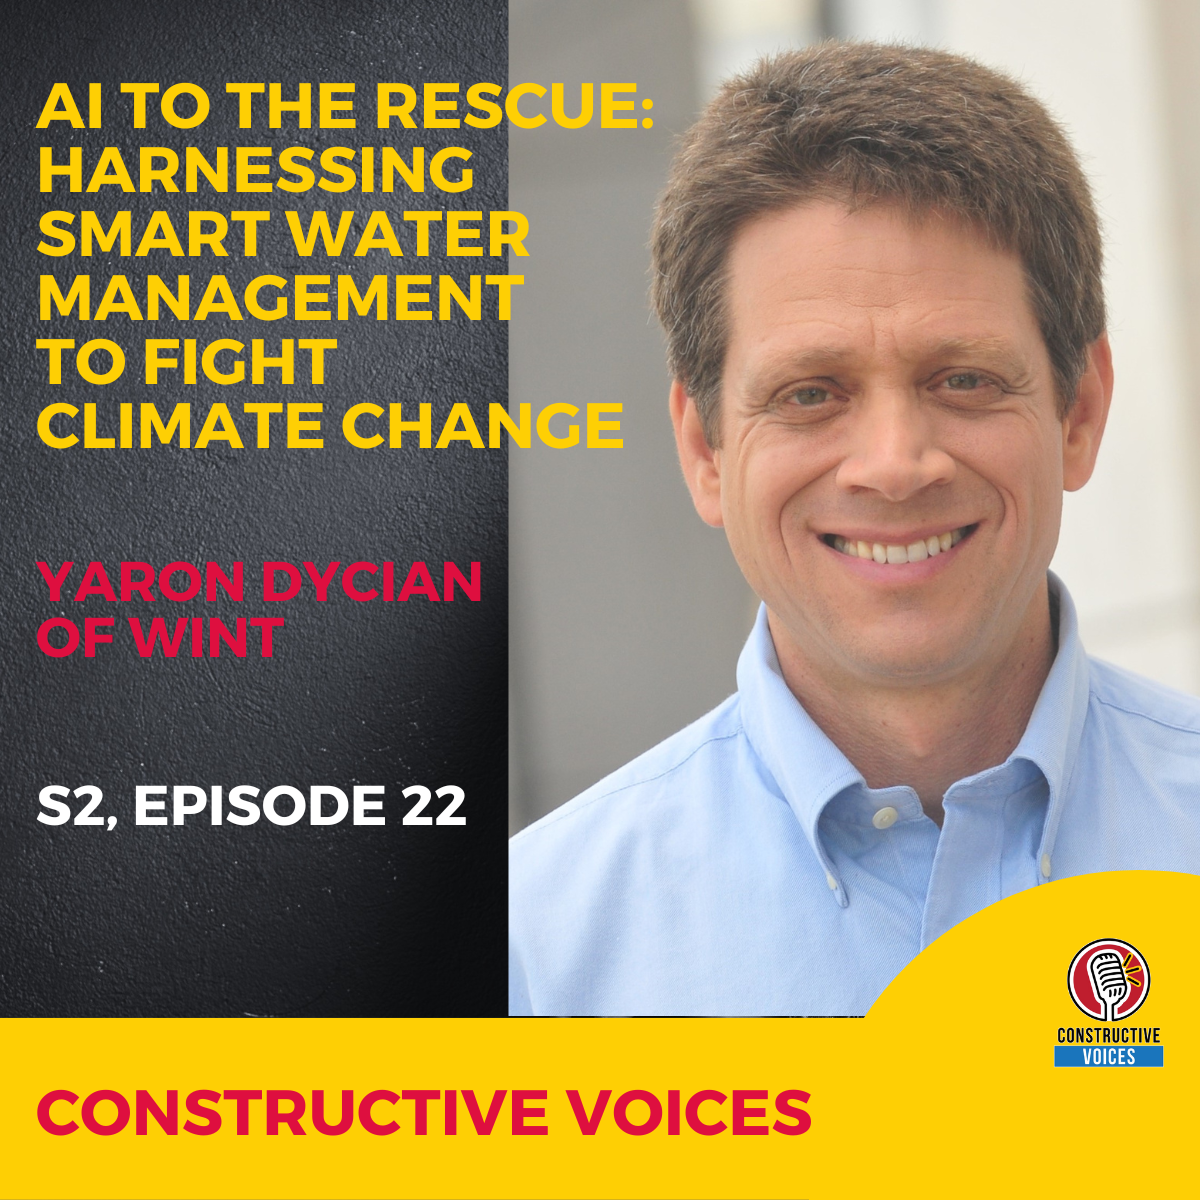 Yaron Dycian of WINT: AI to the Rescue: Harnessing Smart Water Management to Fight Climate Change